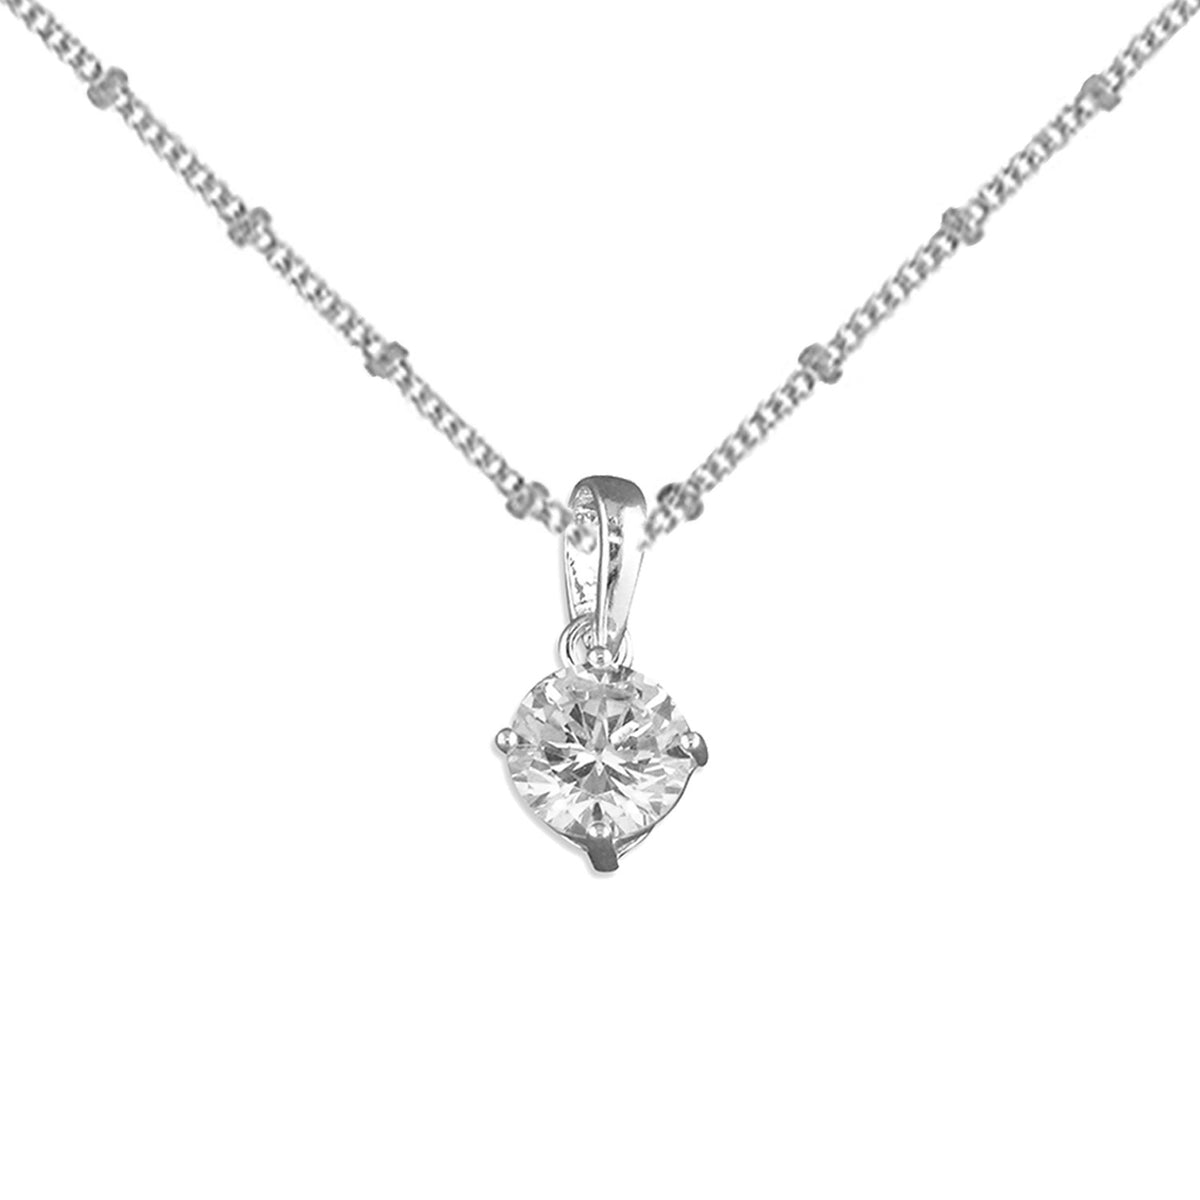 satelte necklace with 7mm cubic zirconia, choker necklace adjustable 